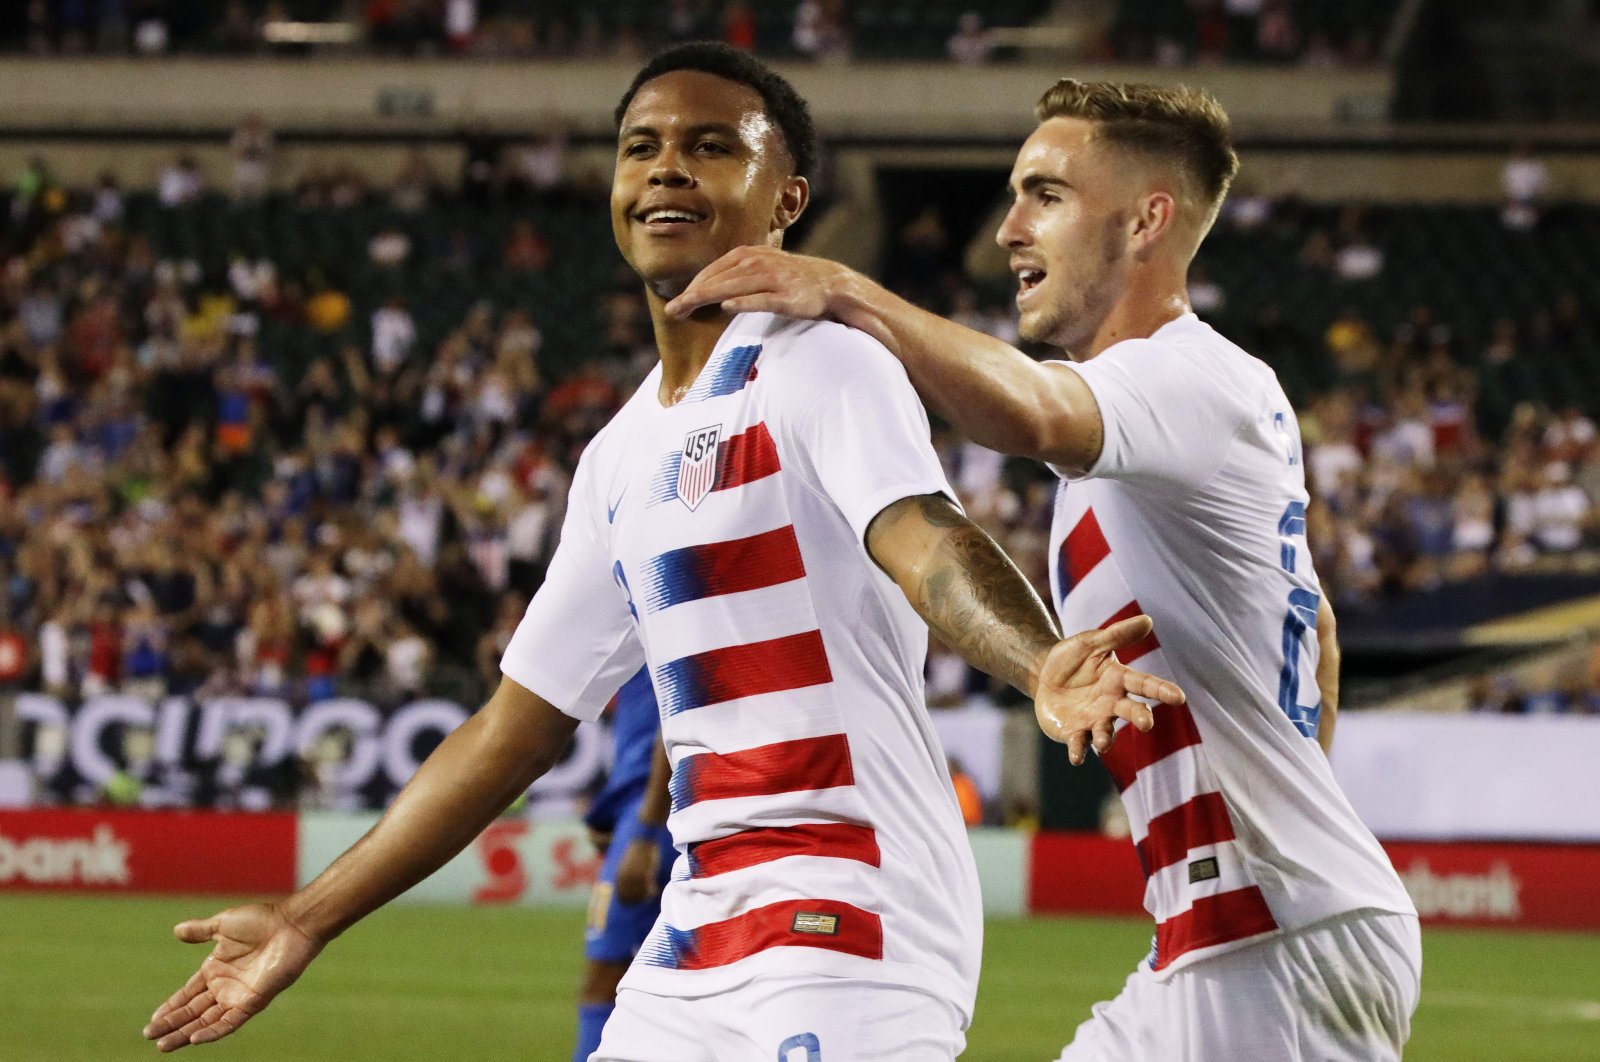 This July 1, 2019, file photo shows U.S.' Tyler Boyd, right, congratulating his teammate Weston McKennie after McKennie scored a goal during the CONCACAF Gold Cup quarterfinal football match between the U.S. and Curacao in Philadelphia, Penn. (AFP Photo)